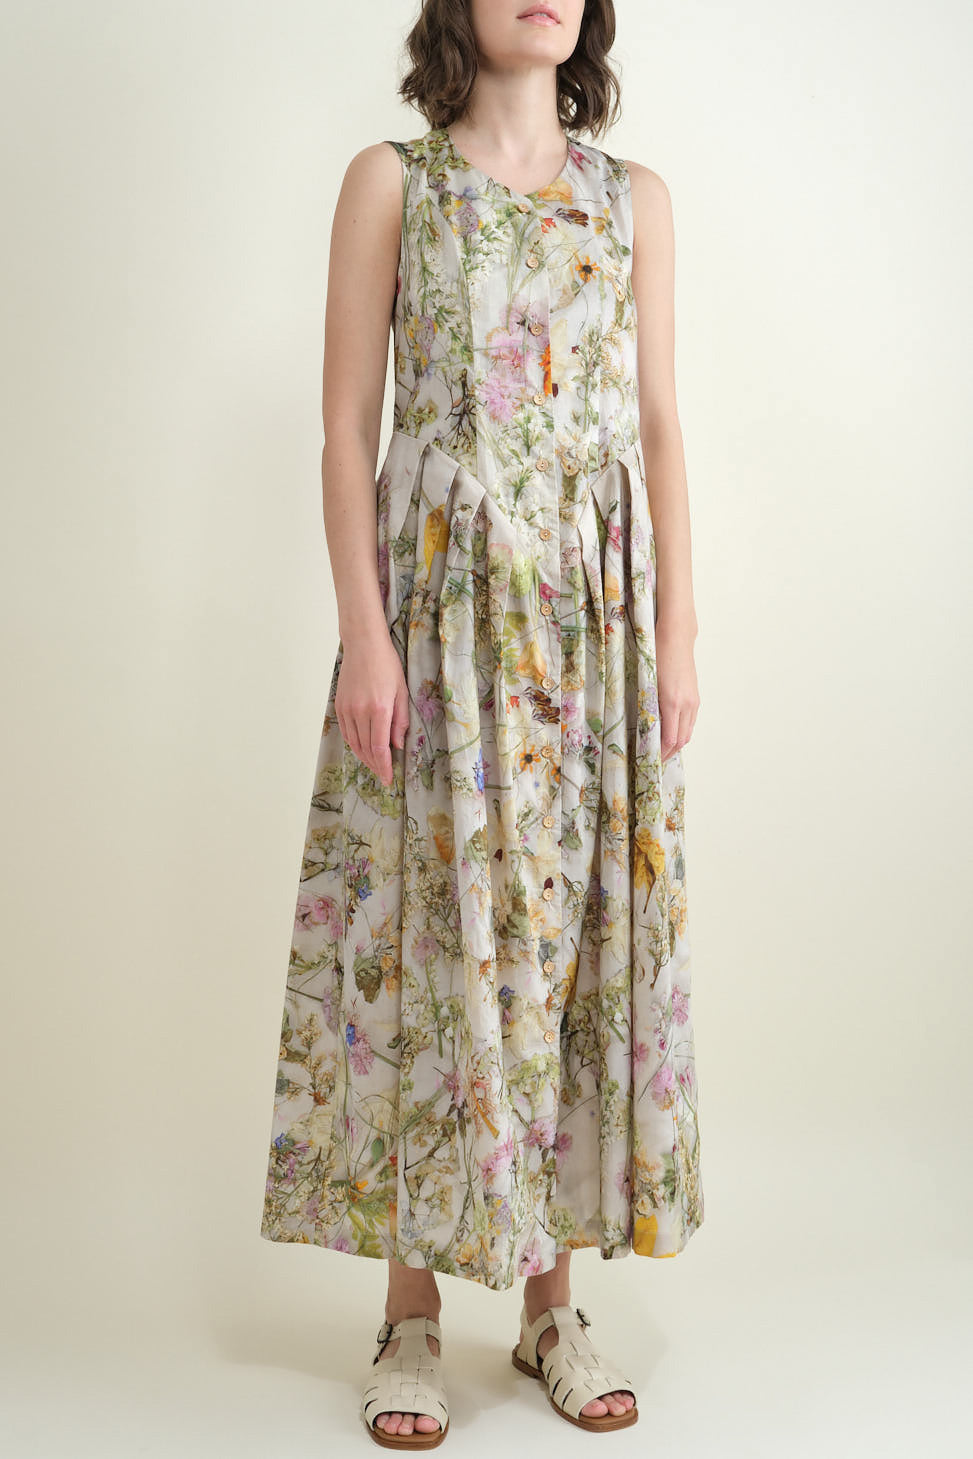 Front of Sleeveless Dress in Print F Pressed Flowers